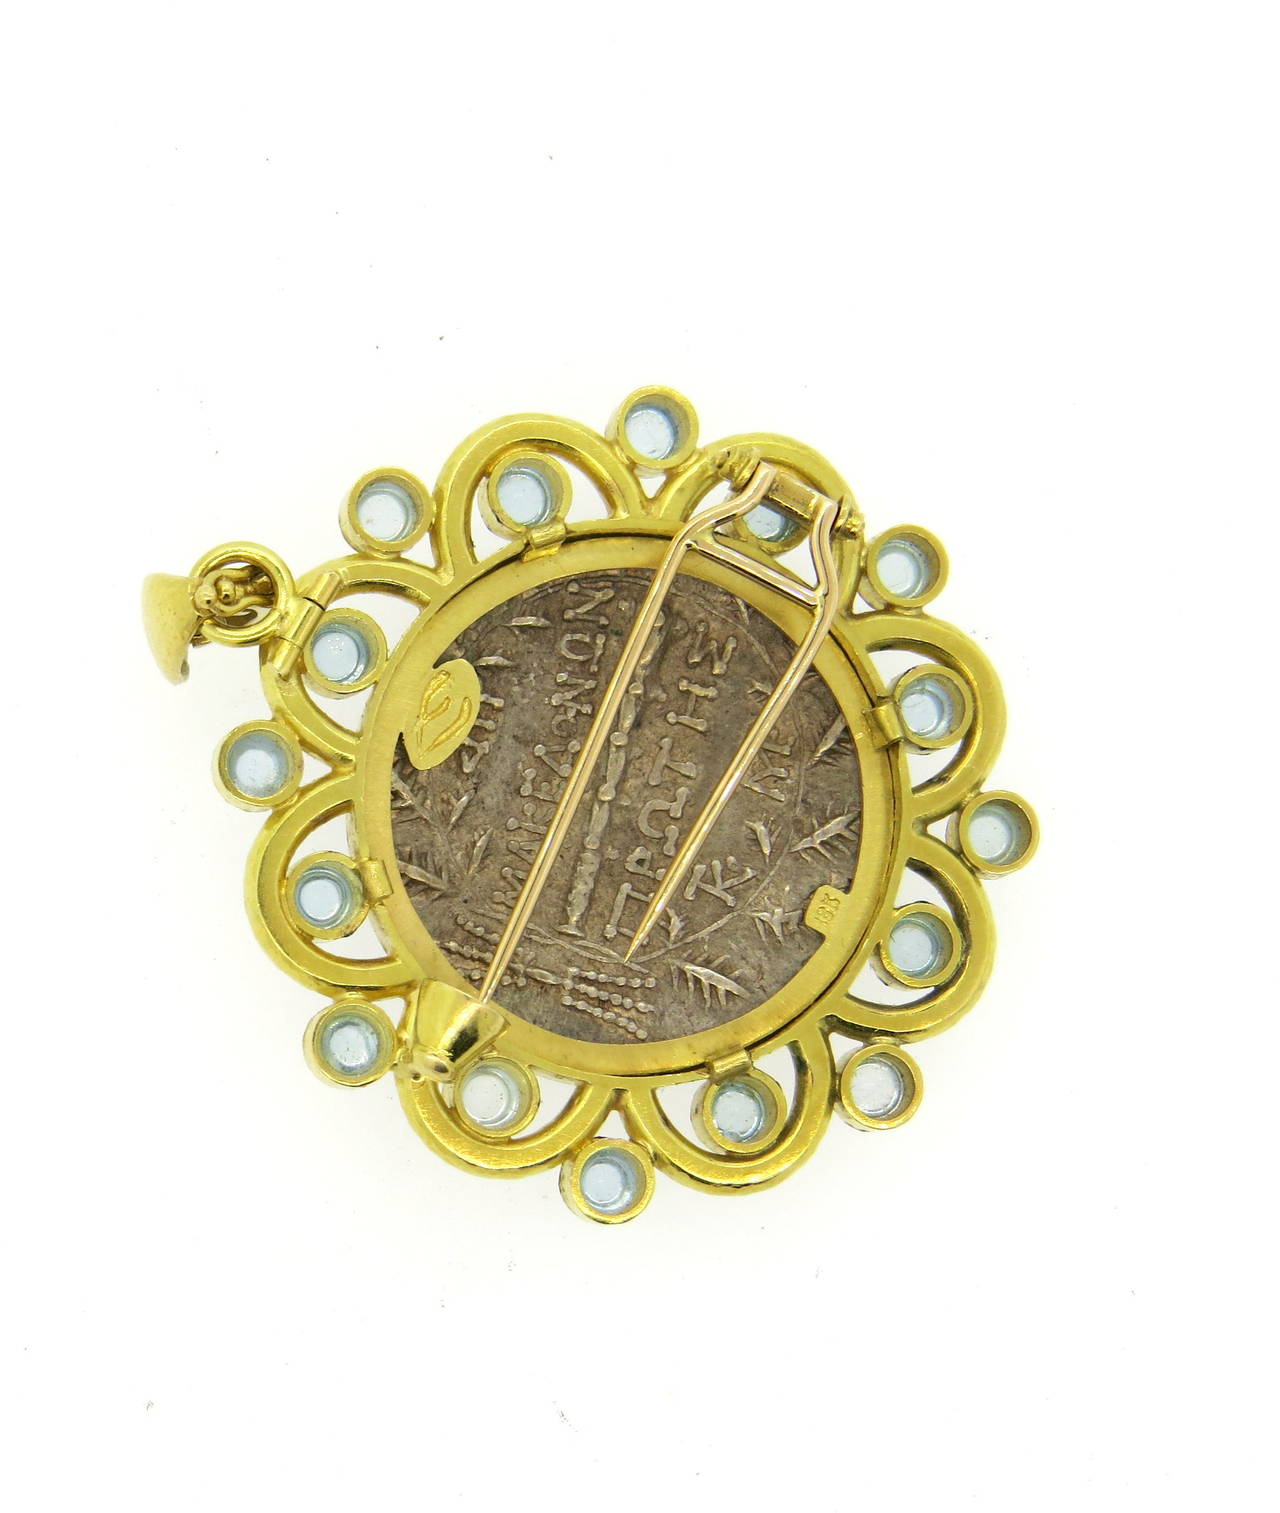 An 18k yellow gold brooch that can also be worn as a pendant.  The piece is comprised of numerous moonstone cabochons approx. 4mm in diameter which surround a coin 29mm in diameter.  Crafted by Elizabeth Locke, the piece measures 48mm x 48mm